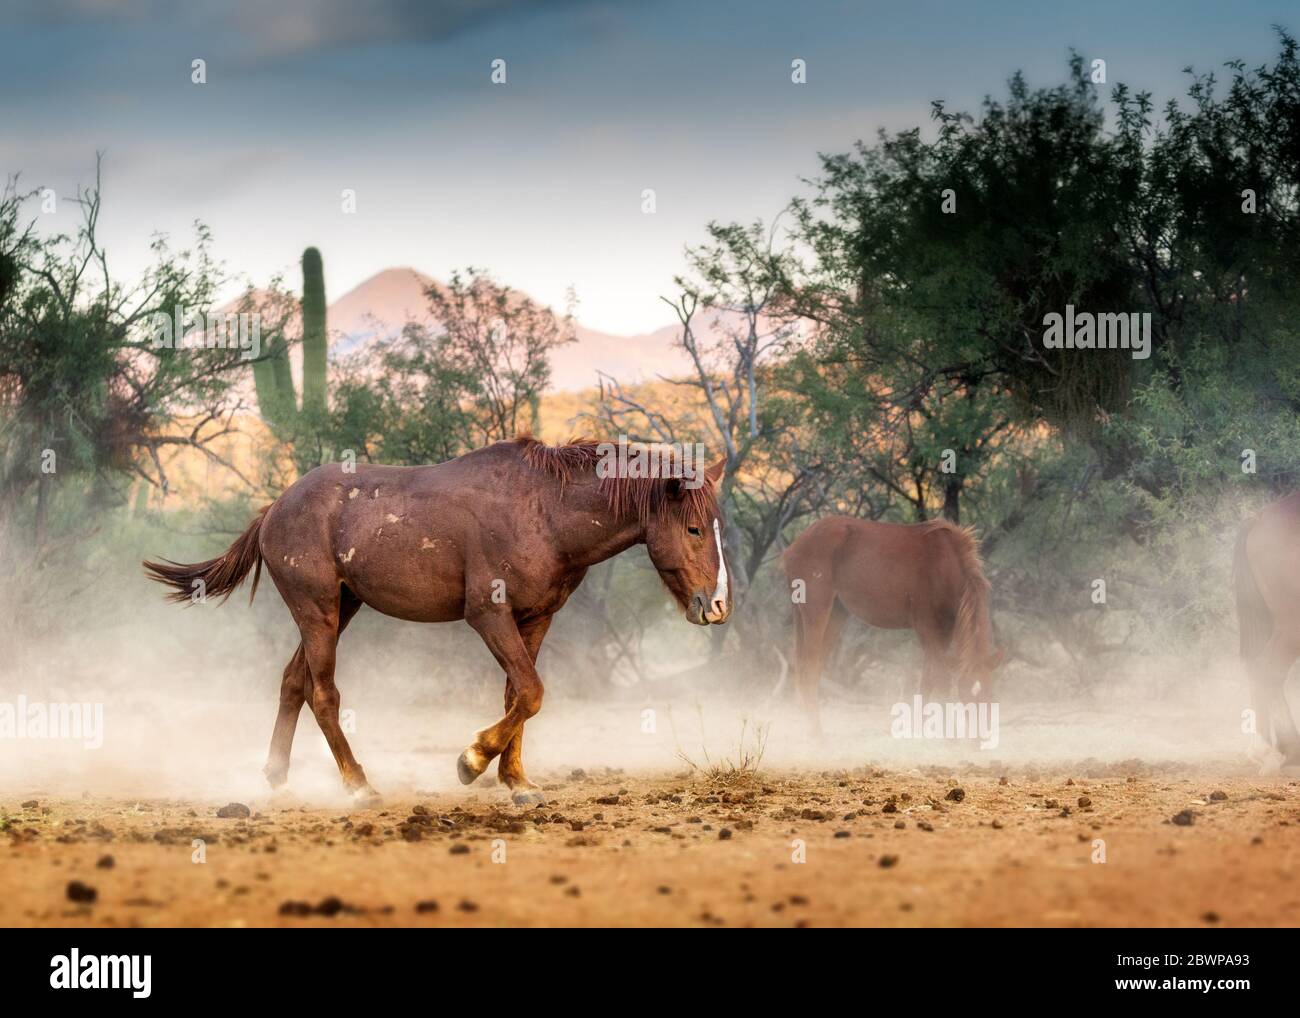 Beautiful stallion horse with battle scars on body running through the Tonto National Forest kicking up dust near the Salt River in Mesa, Arizona Stock Photo